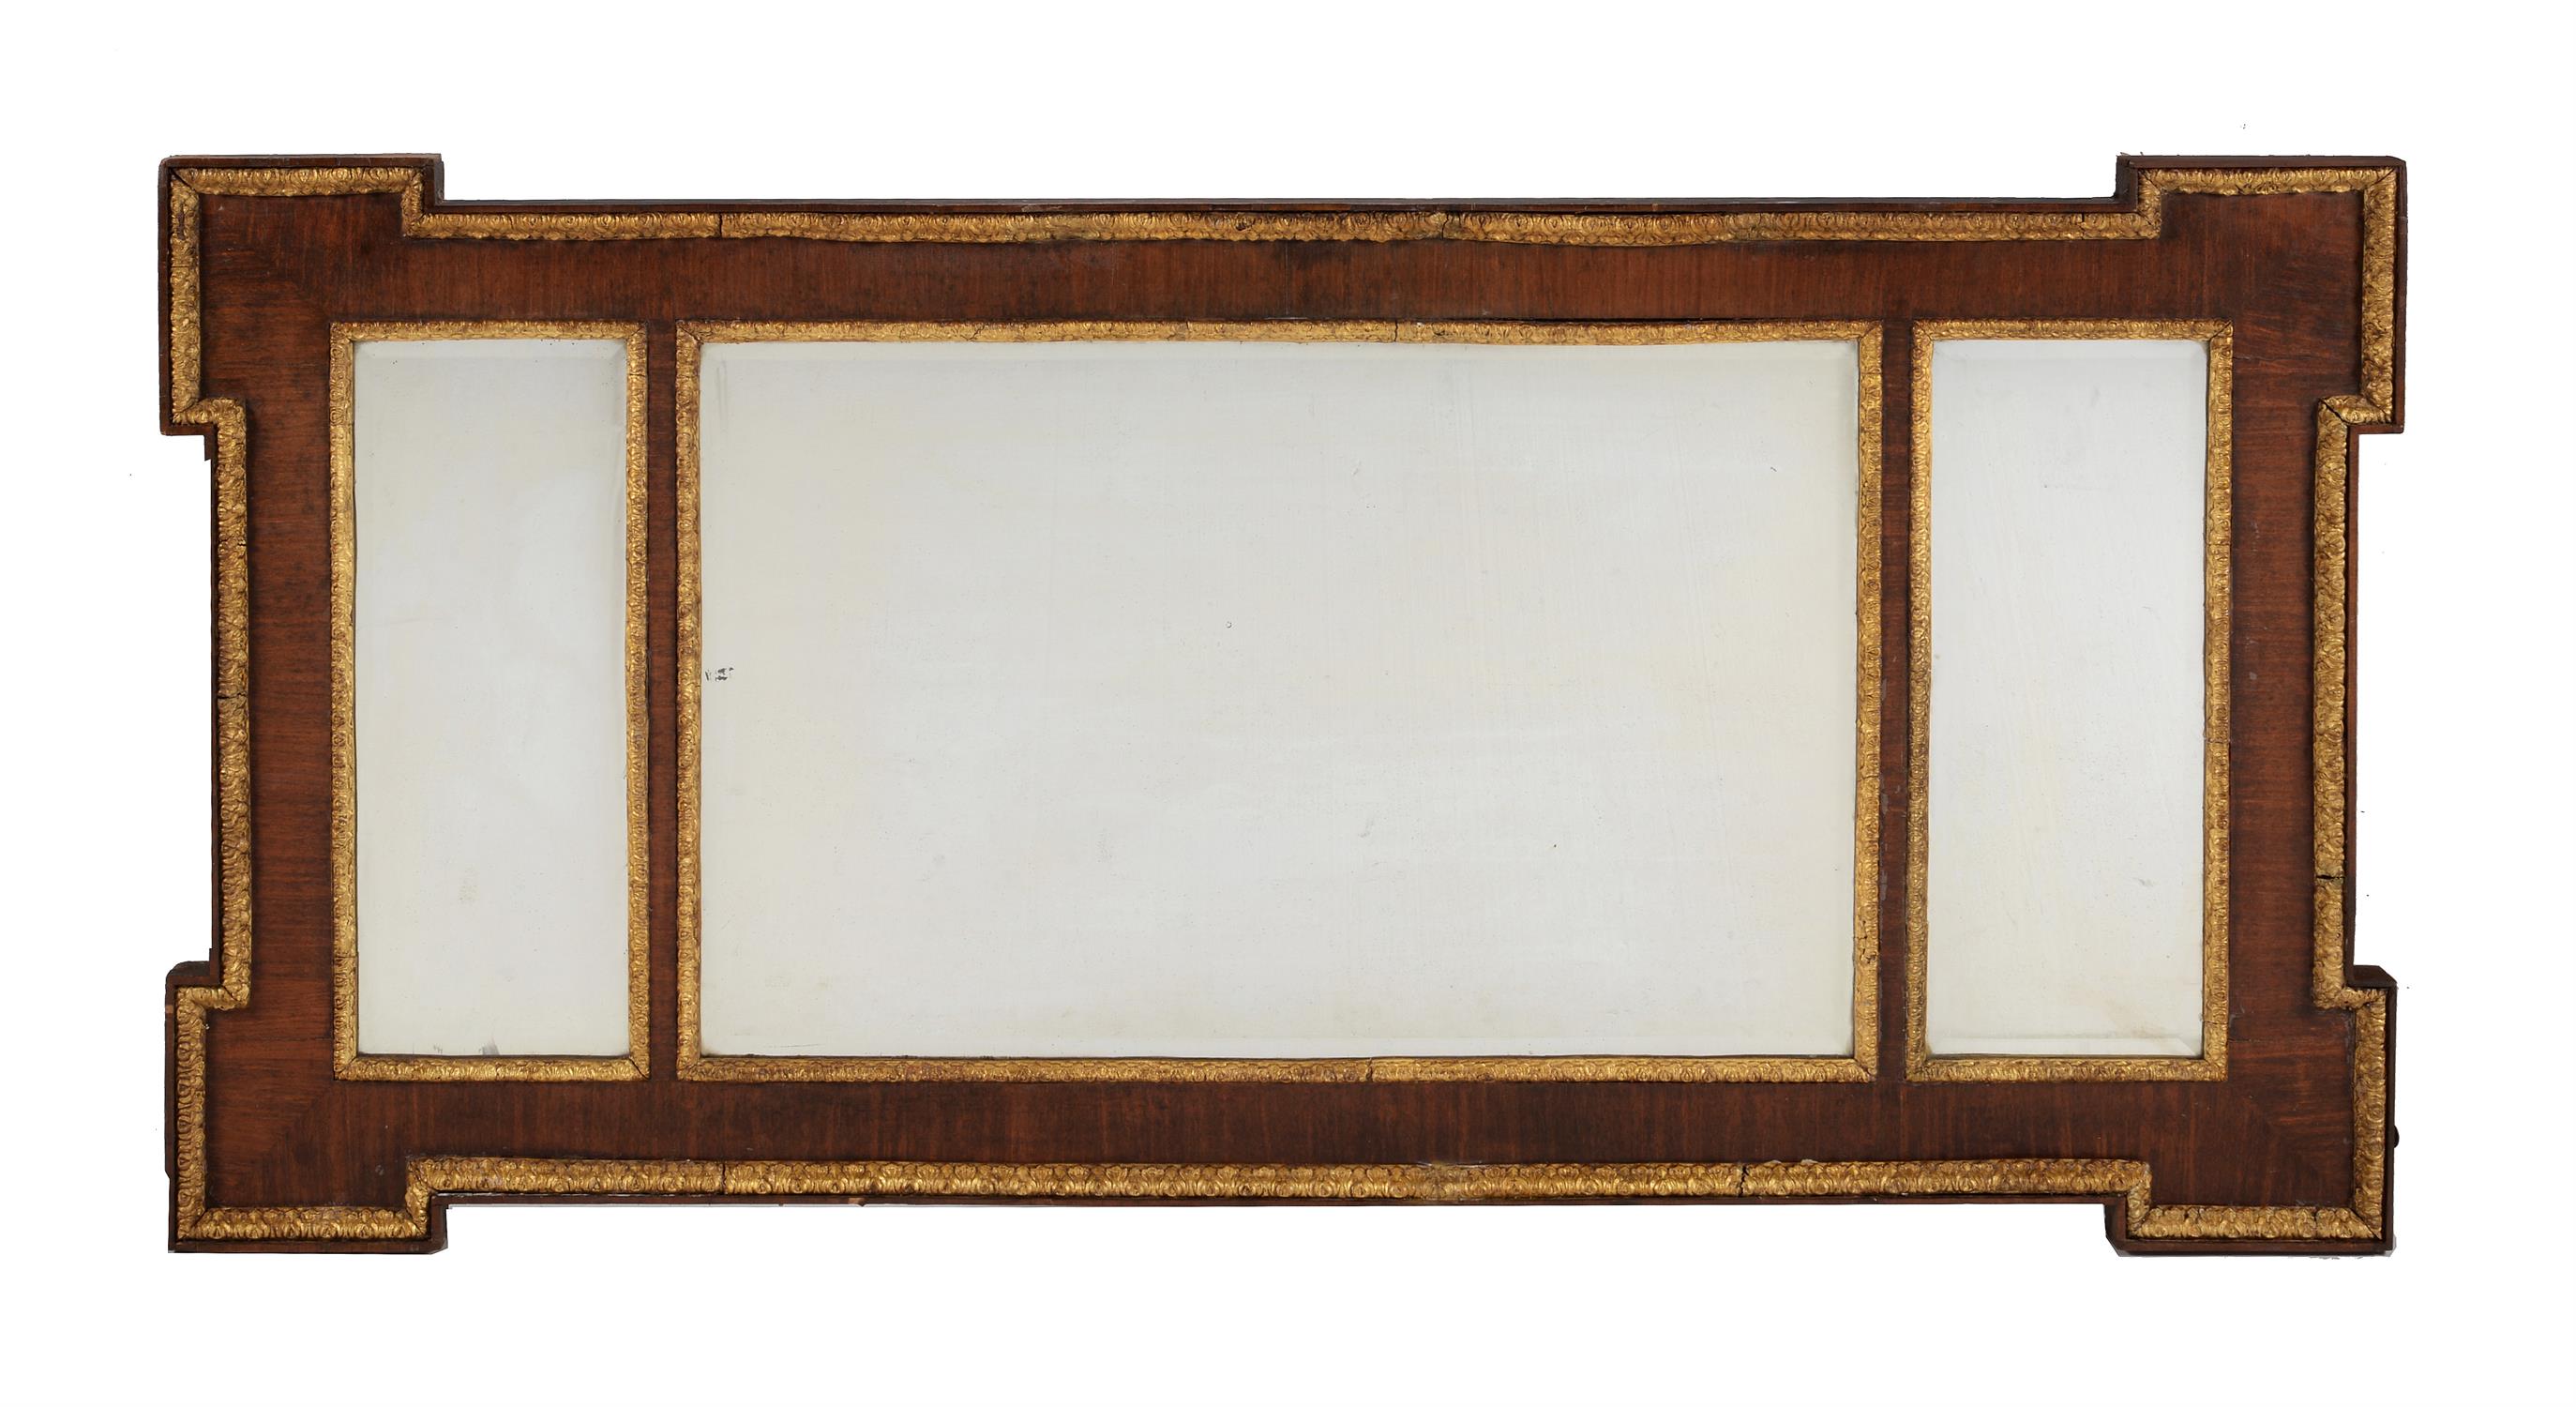 A exotic wood and parcel giltwood wall mirror, 19th century or earlier